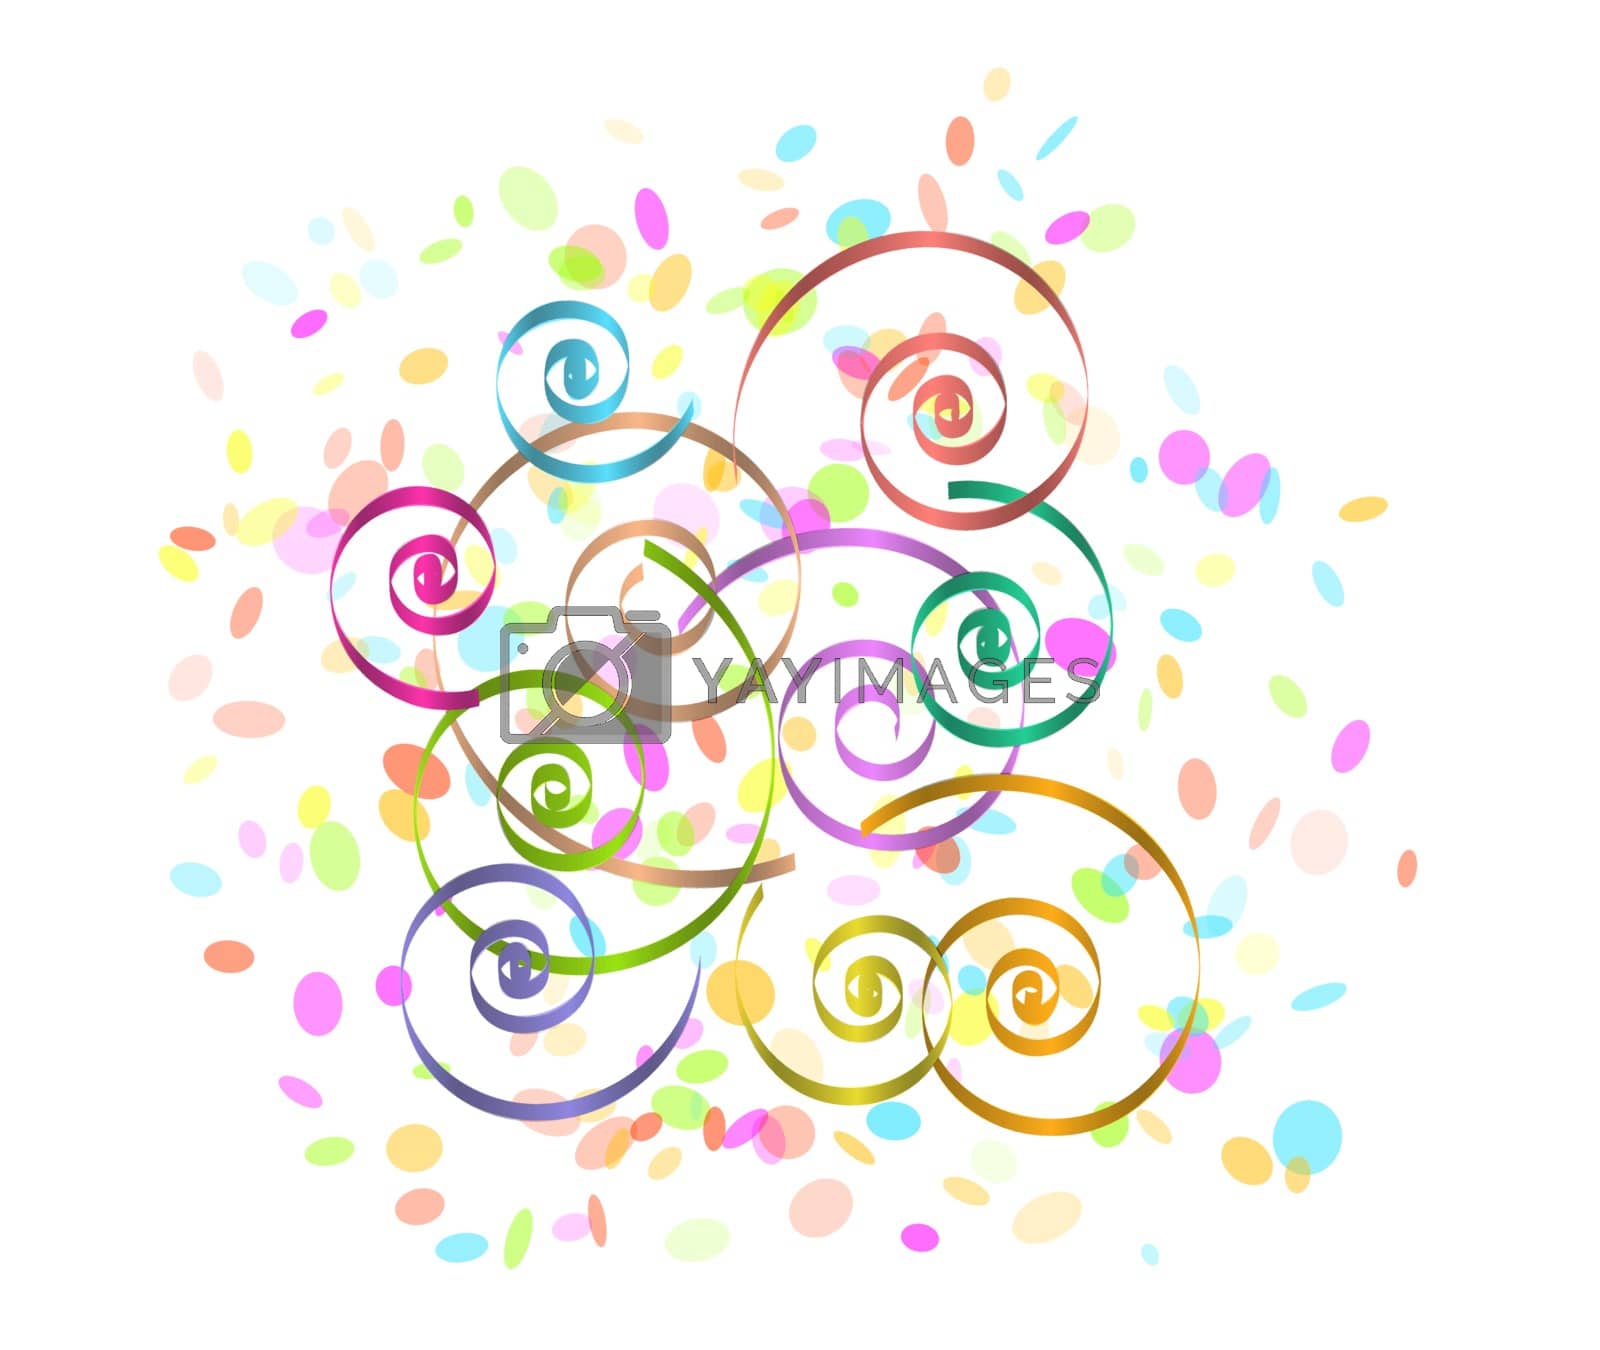 Royalty free image of confetti and spirals by muuraa